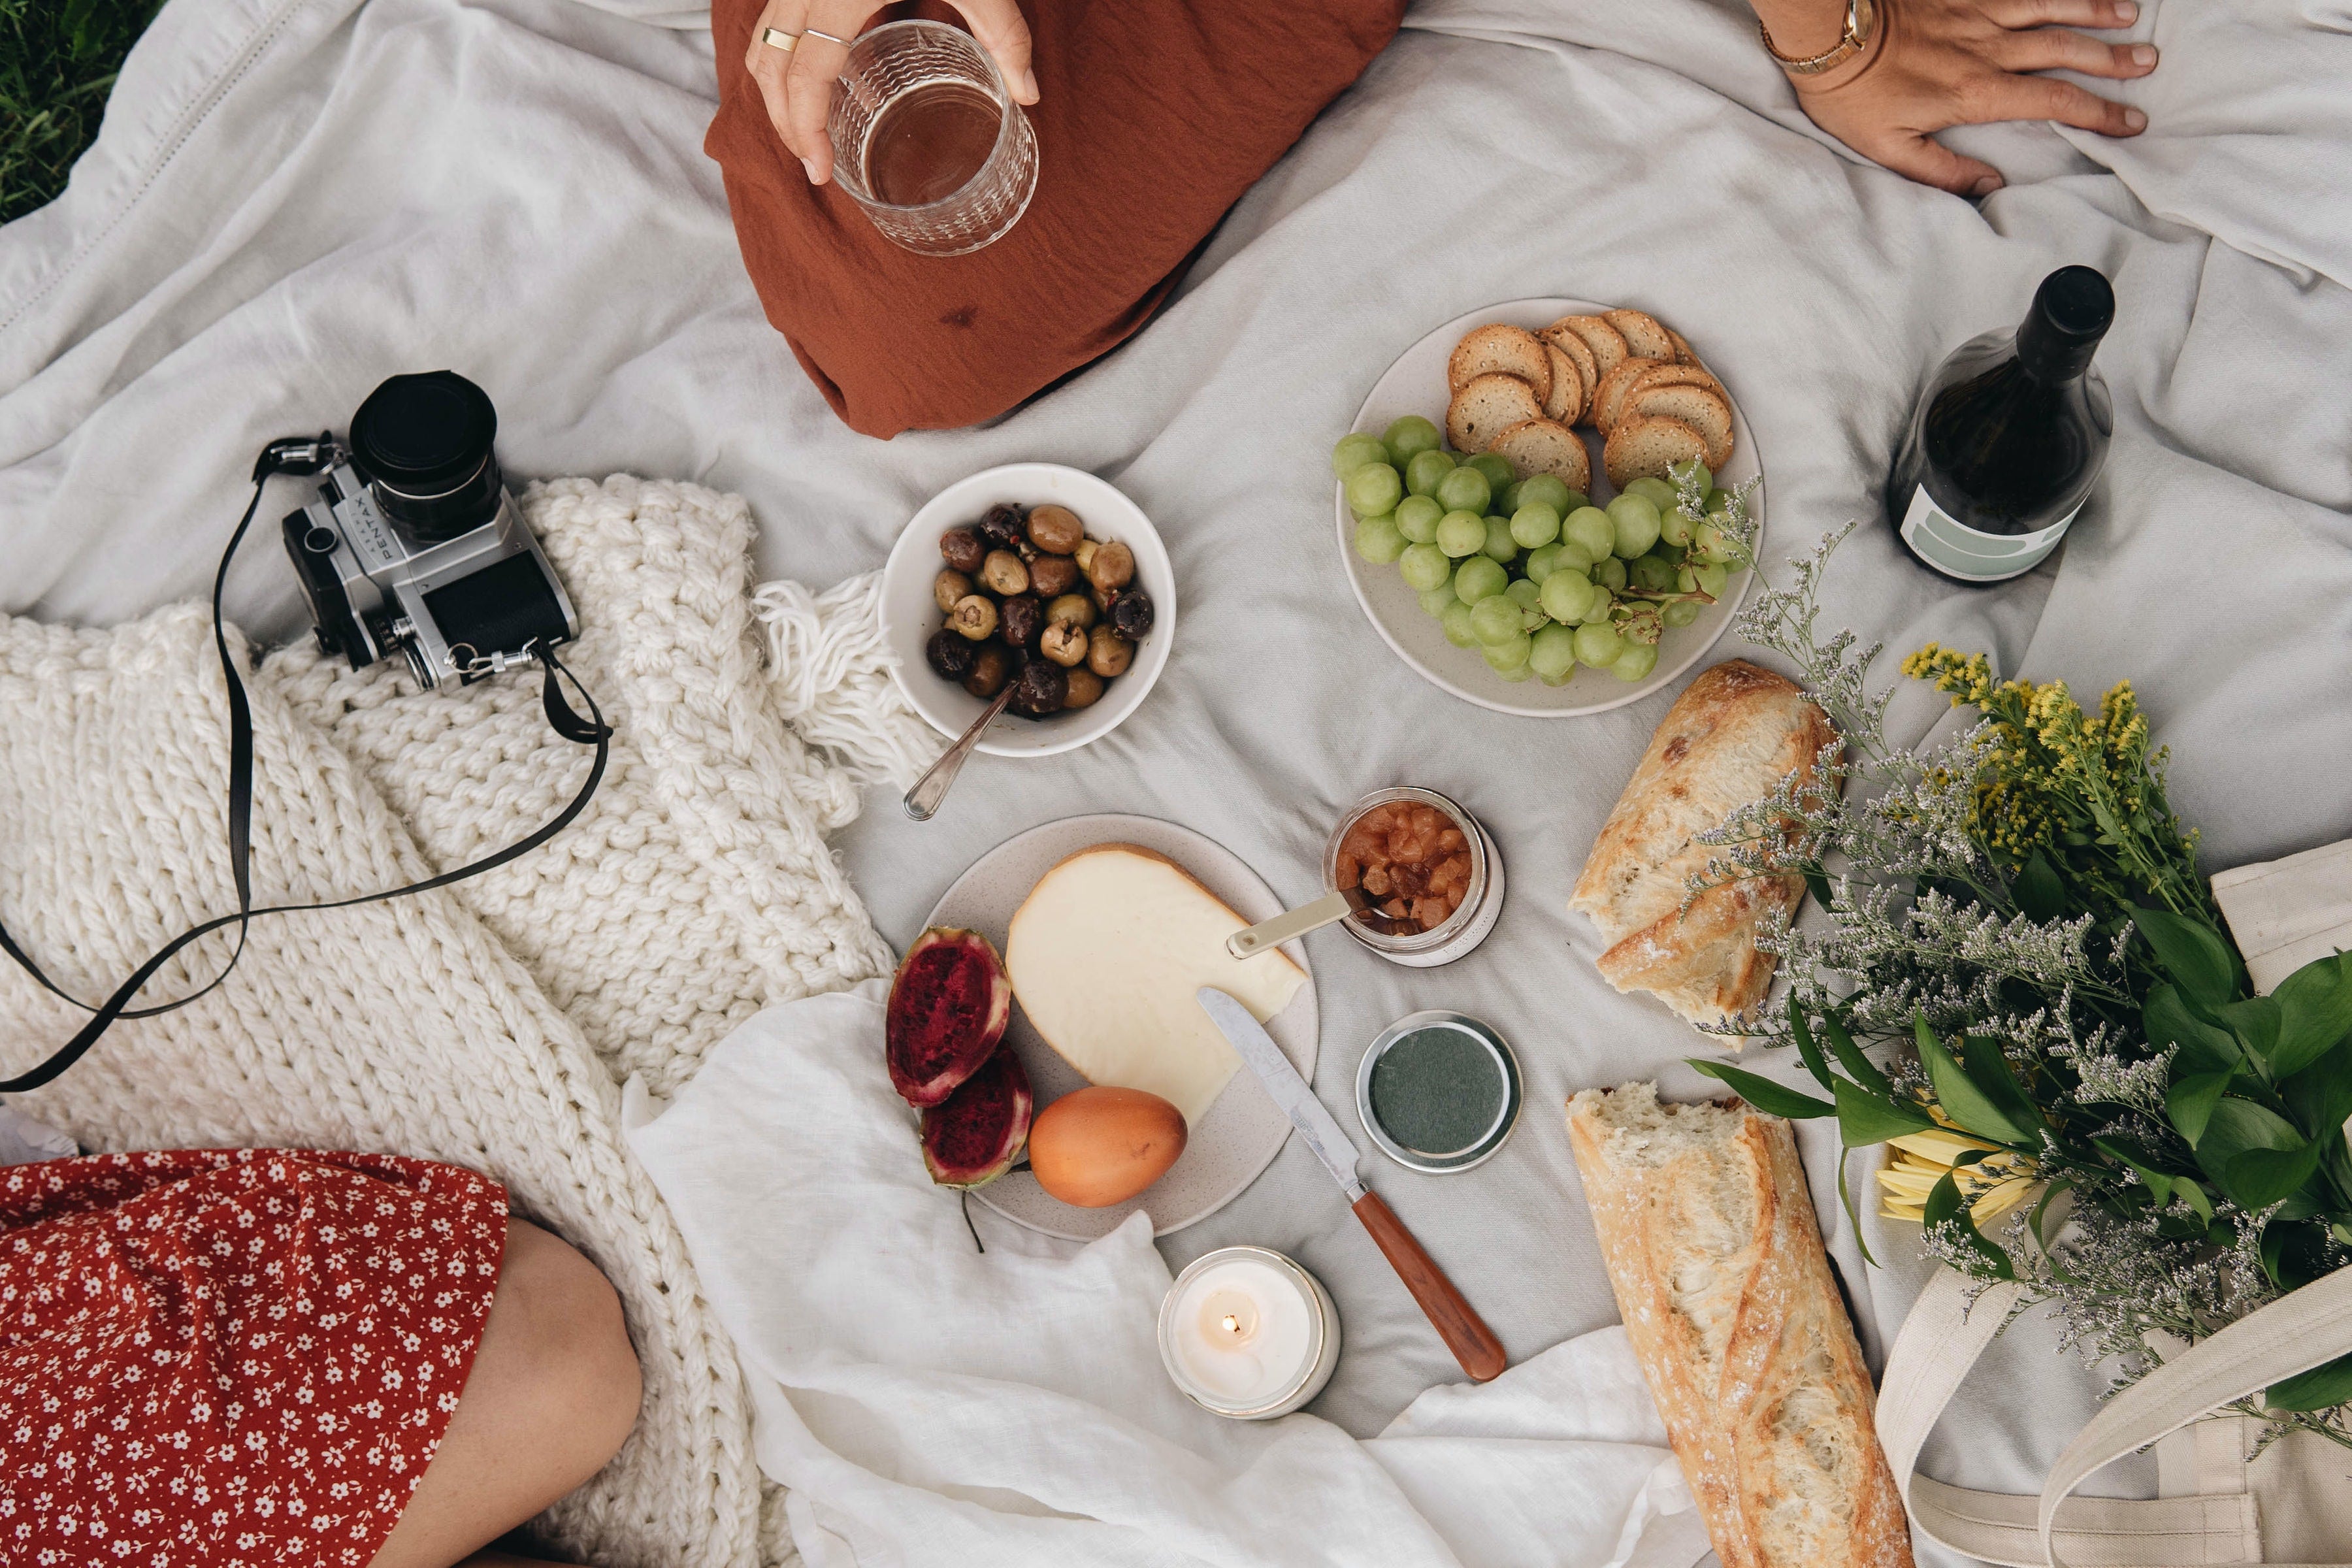 HOW TO HAVE A SUSTAINABLE PICNIC